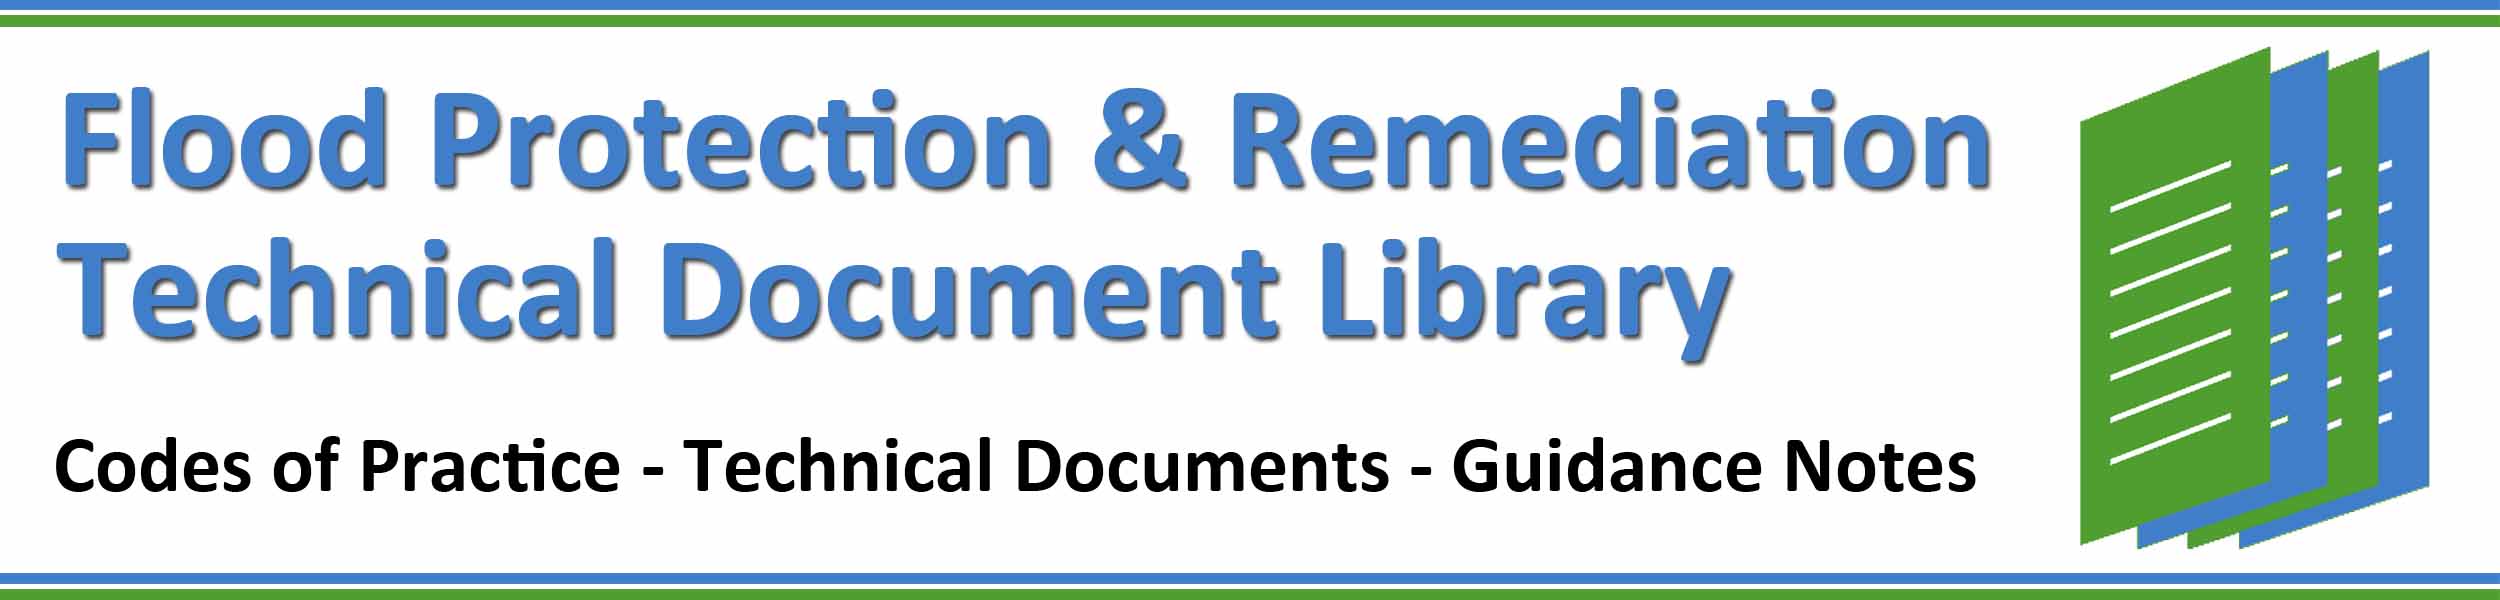 Flood-Protection-Remediation-Document-Library-Aug-2020